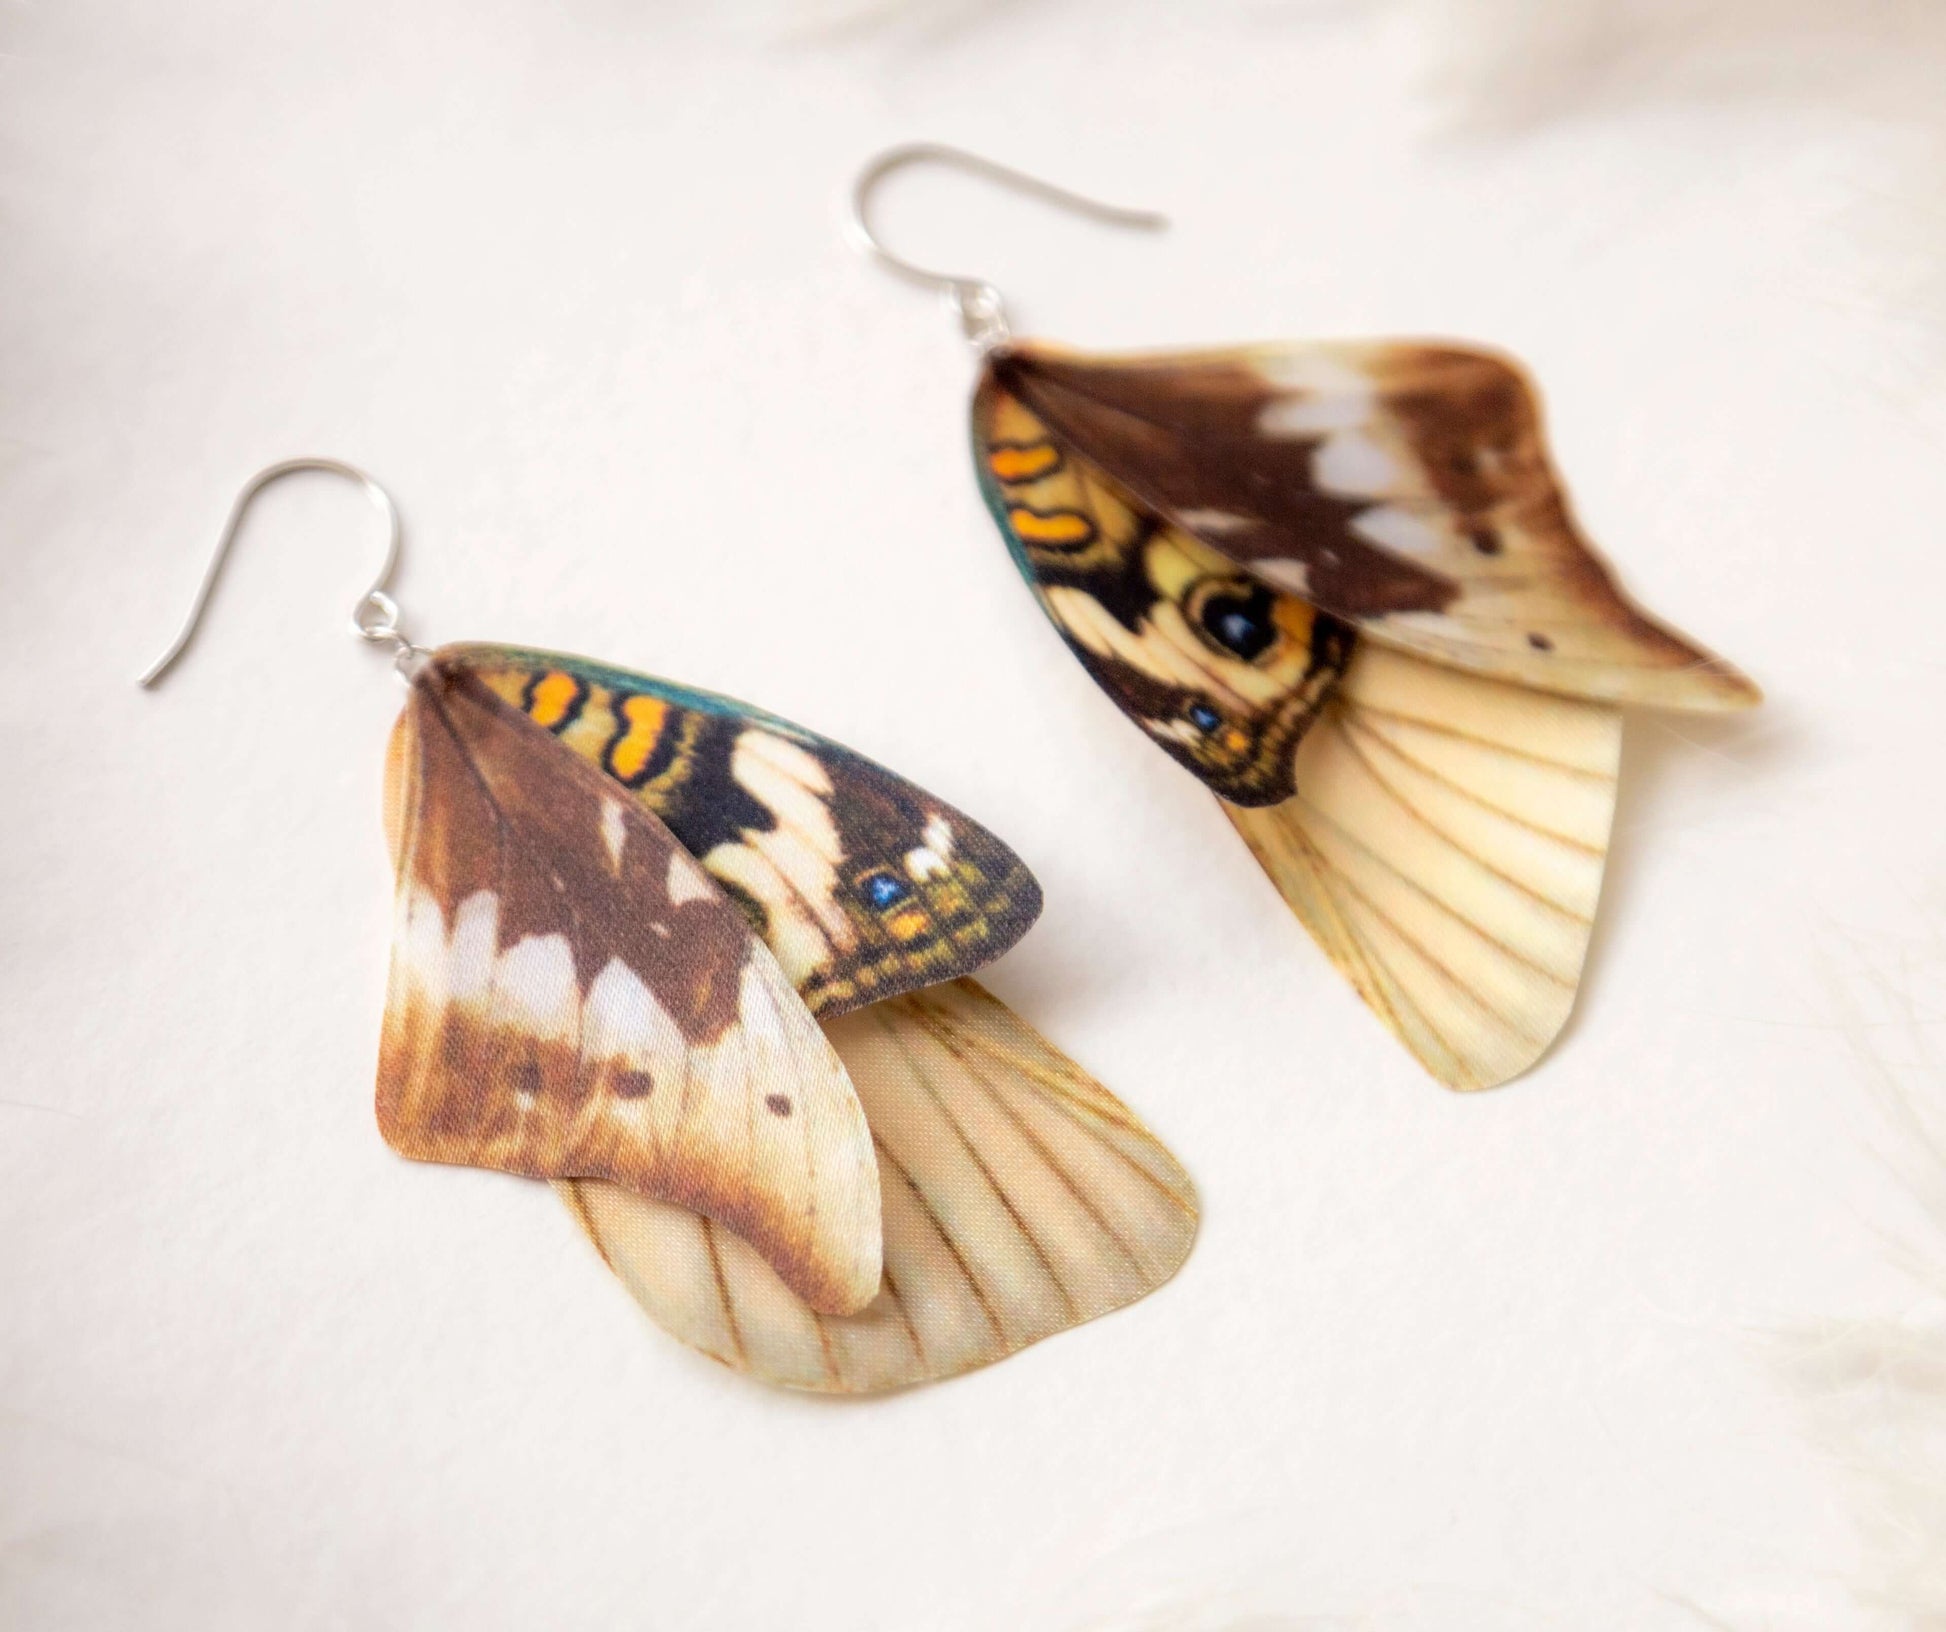 Unique and quirky insect jewelry with moth wings